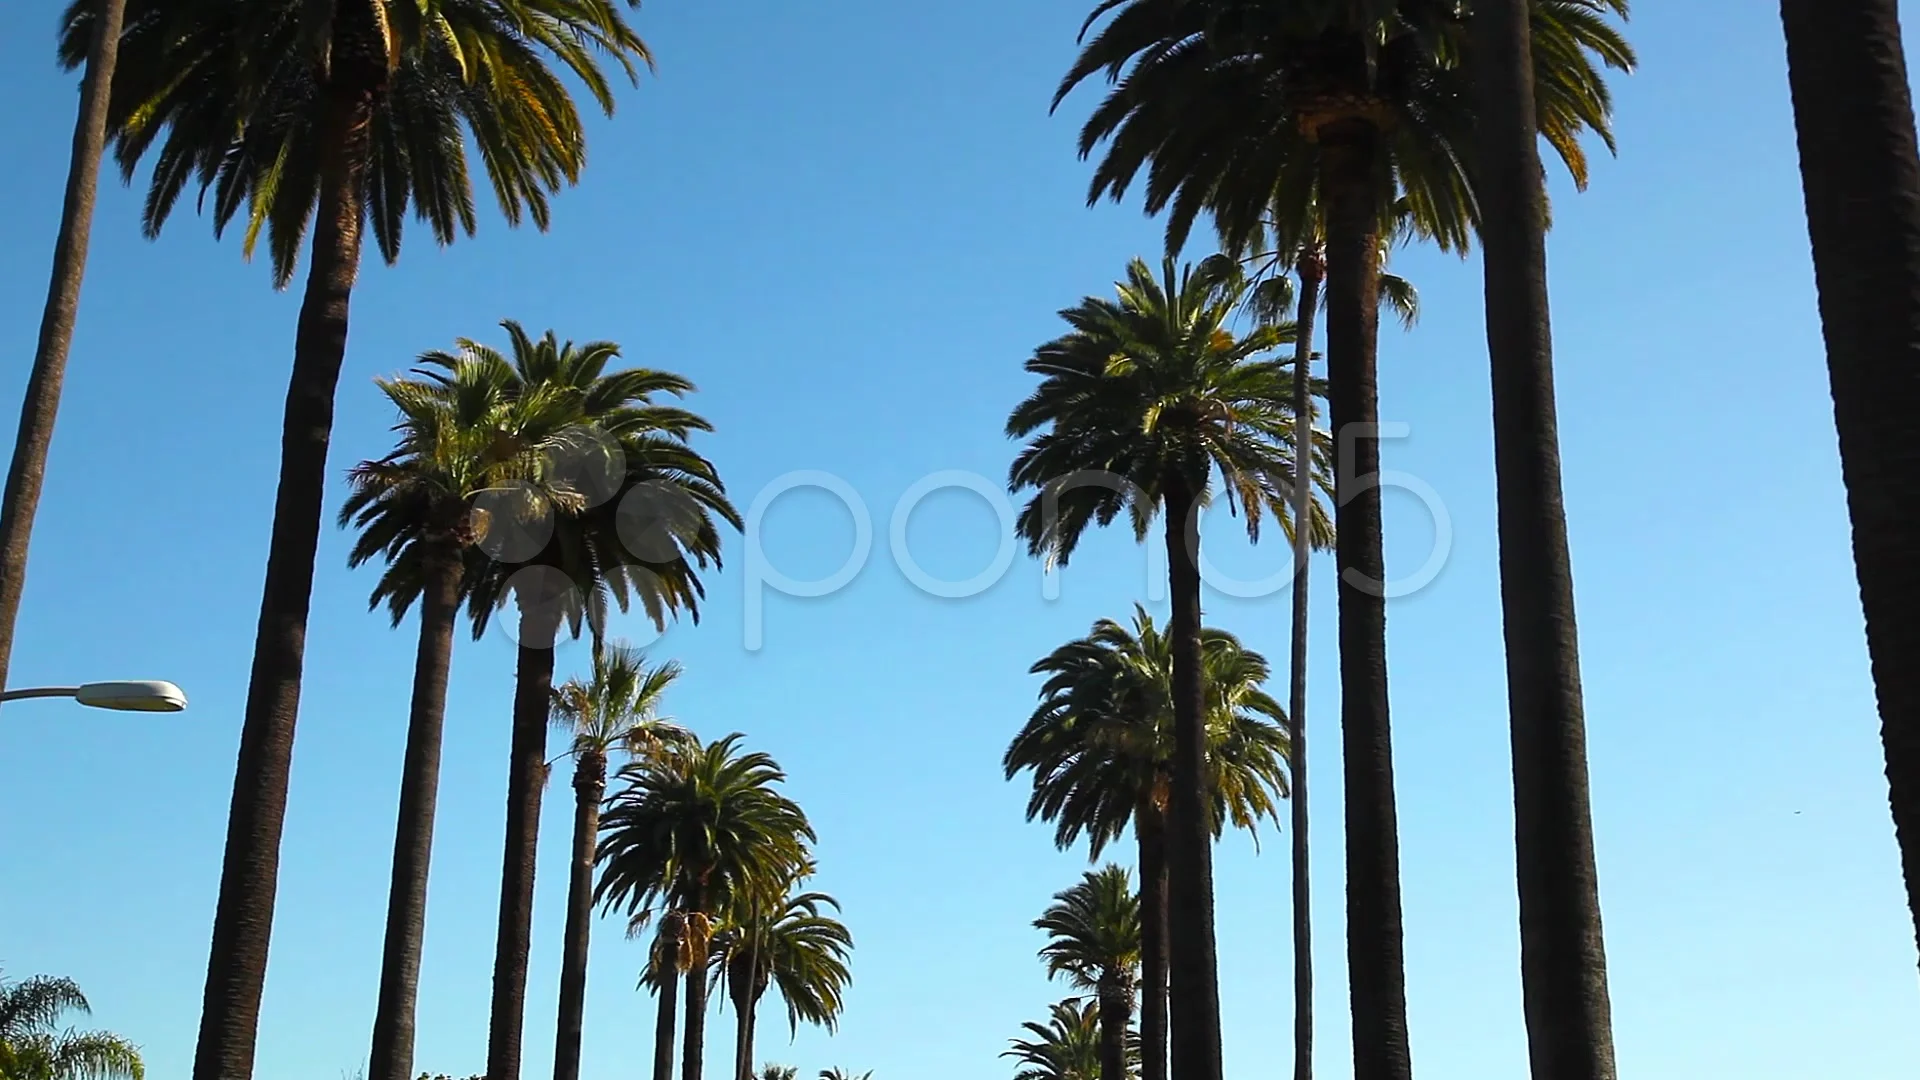 Rodeo Drive - Palm trees wrapped in glowing lights, on a cool